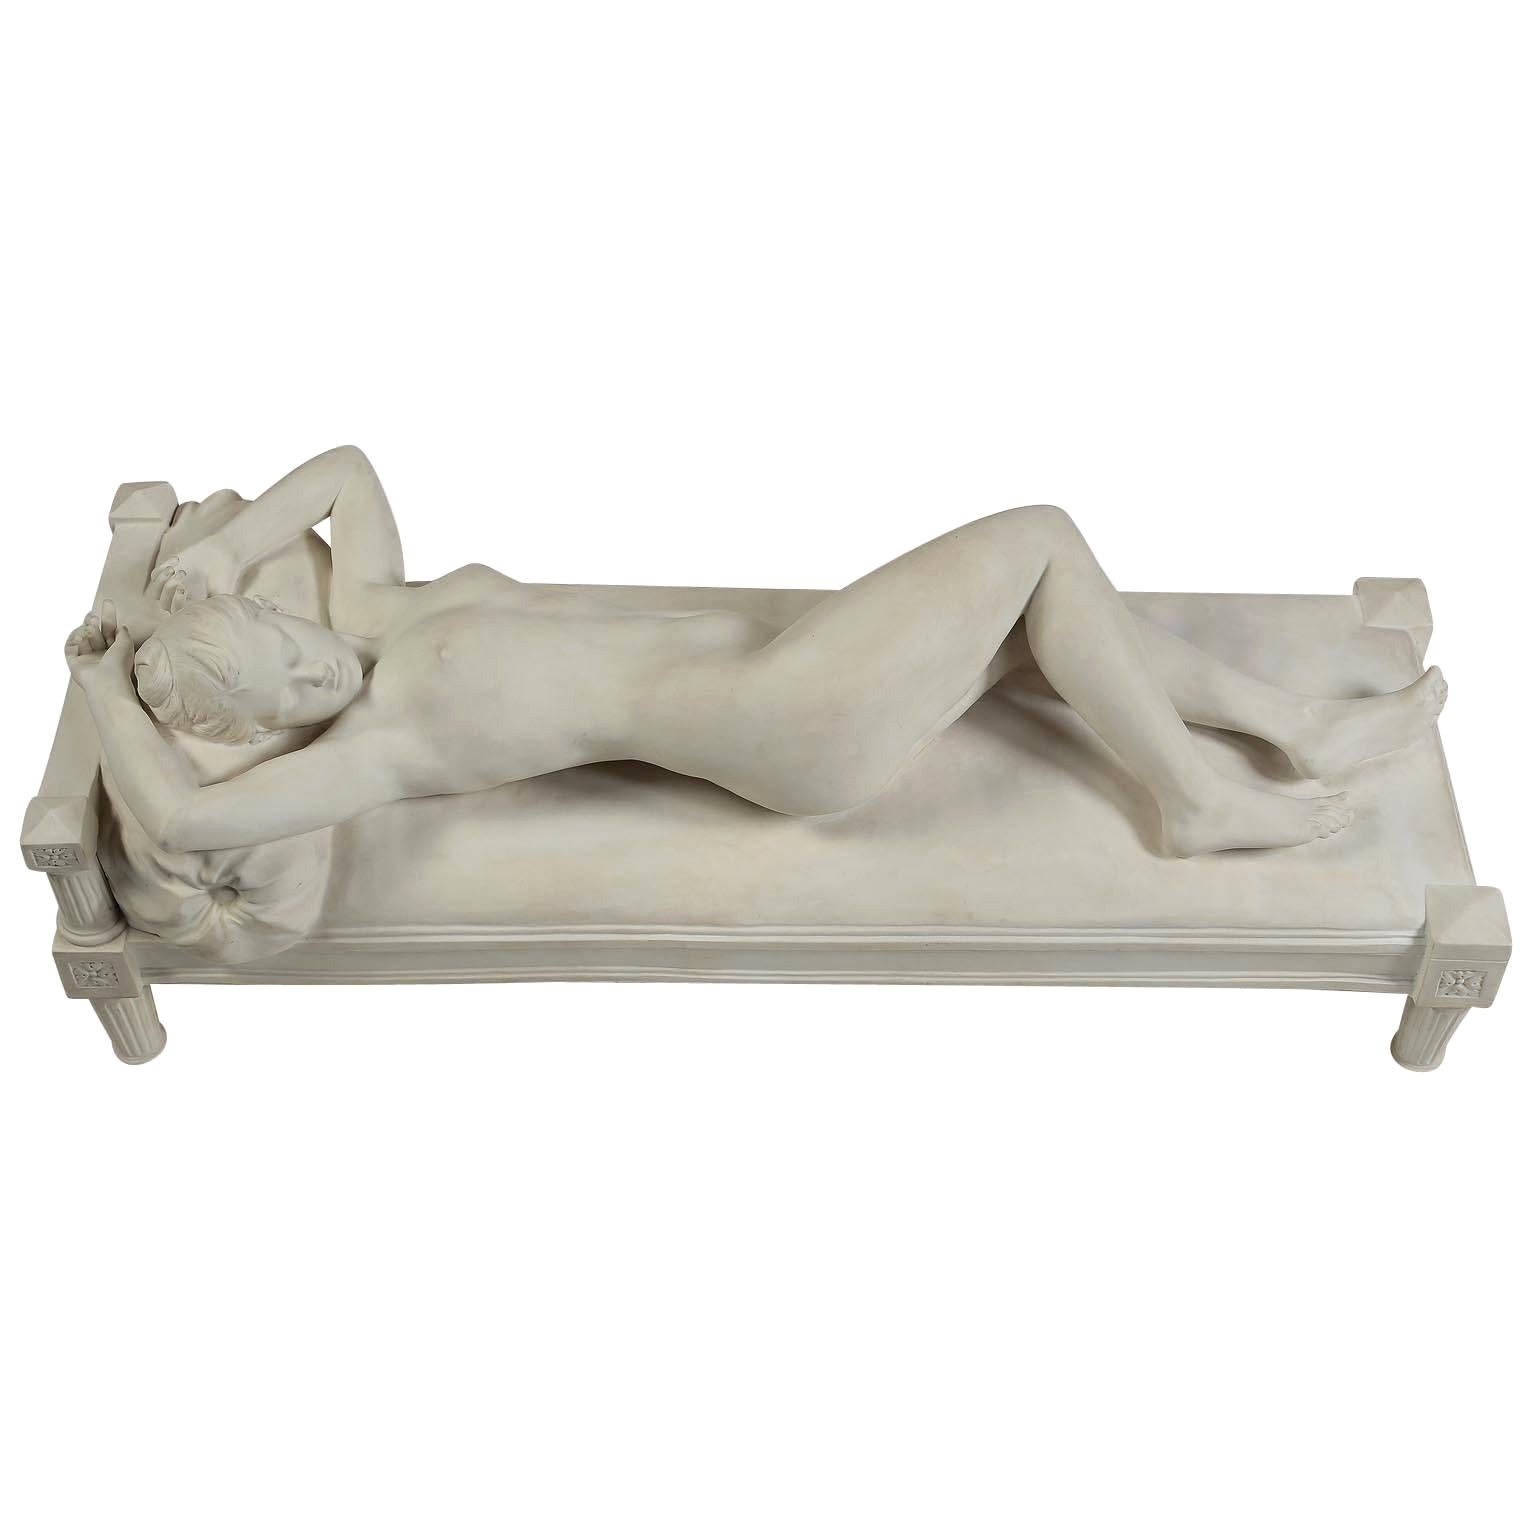 French Sevres Biscuit Porcelain Figure of a Nude "Le Repos" After Alfred Boucher For Sale